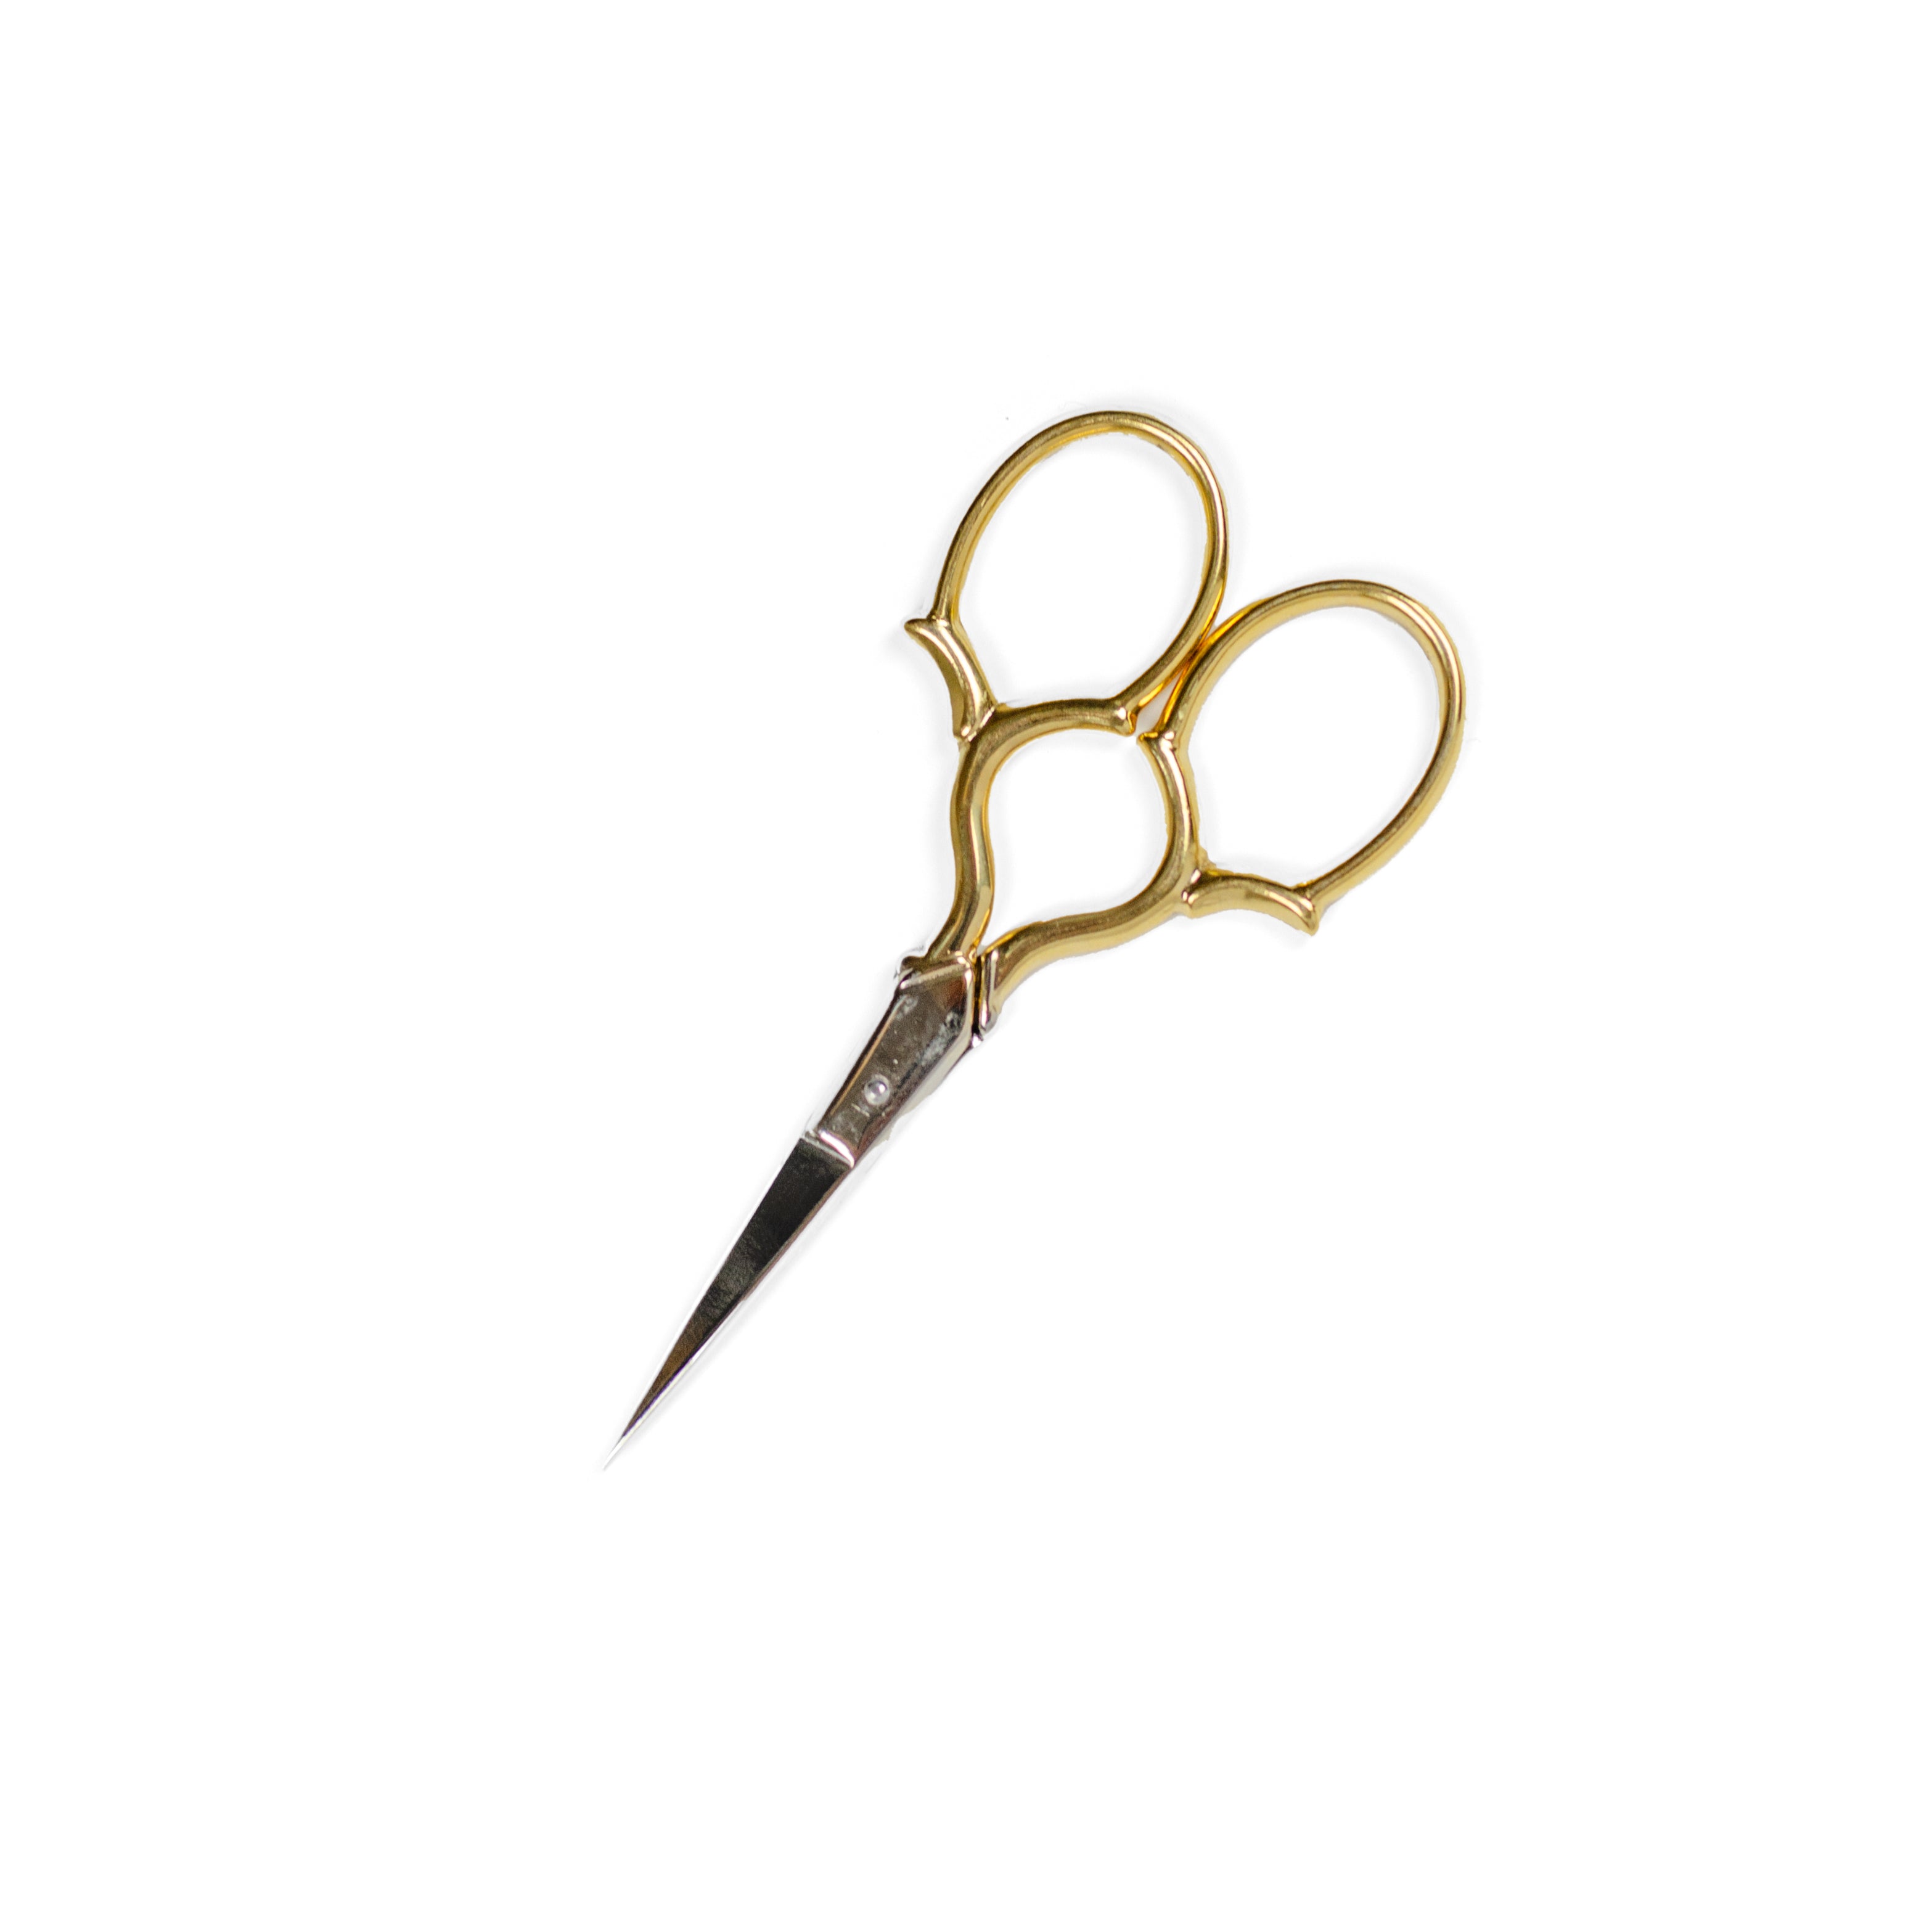 Gingher 01-005280 Stork Embroidery Scissors, 3.5 inch, Gold